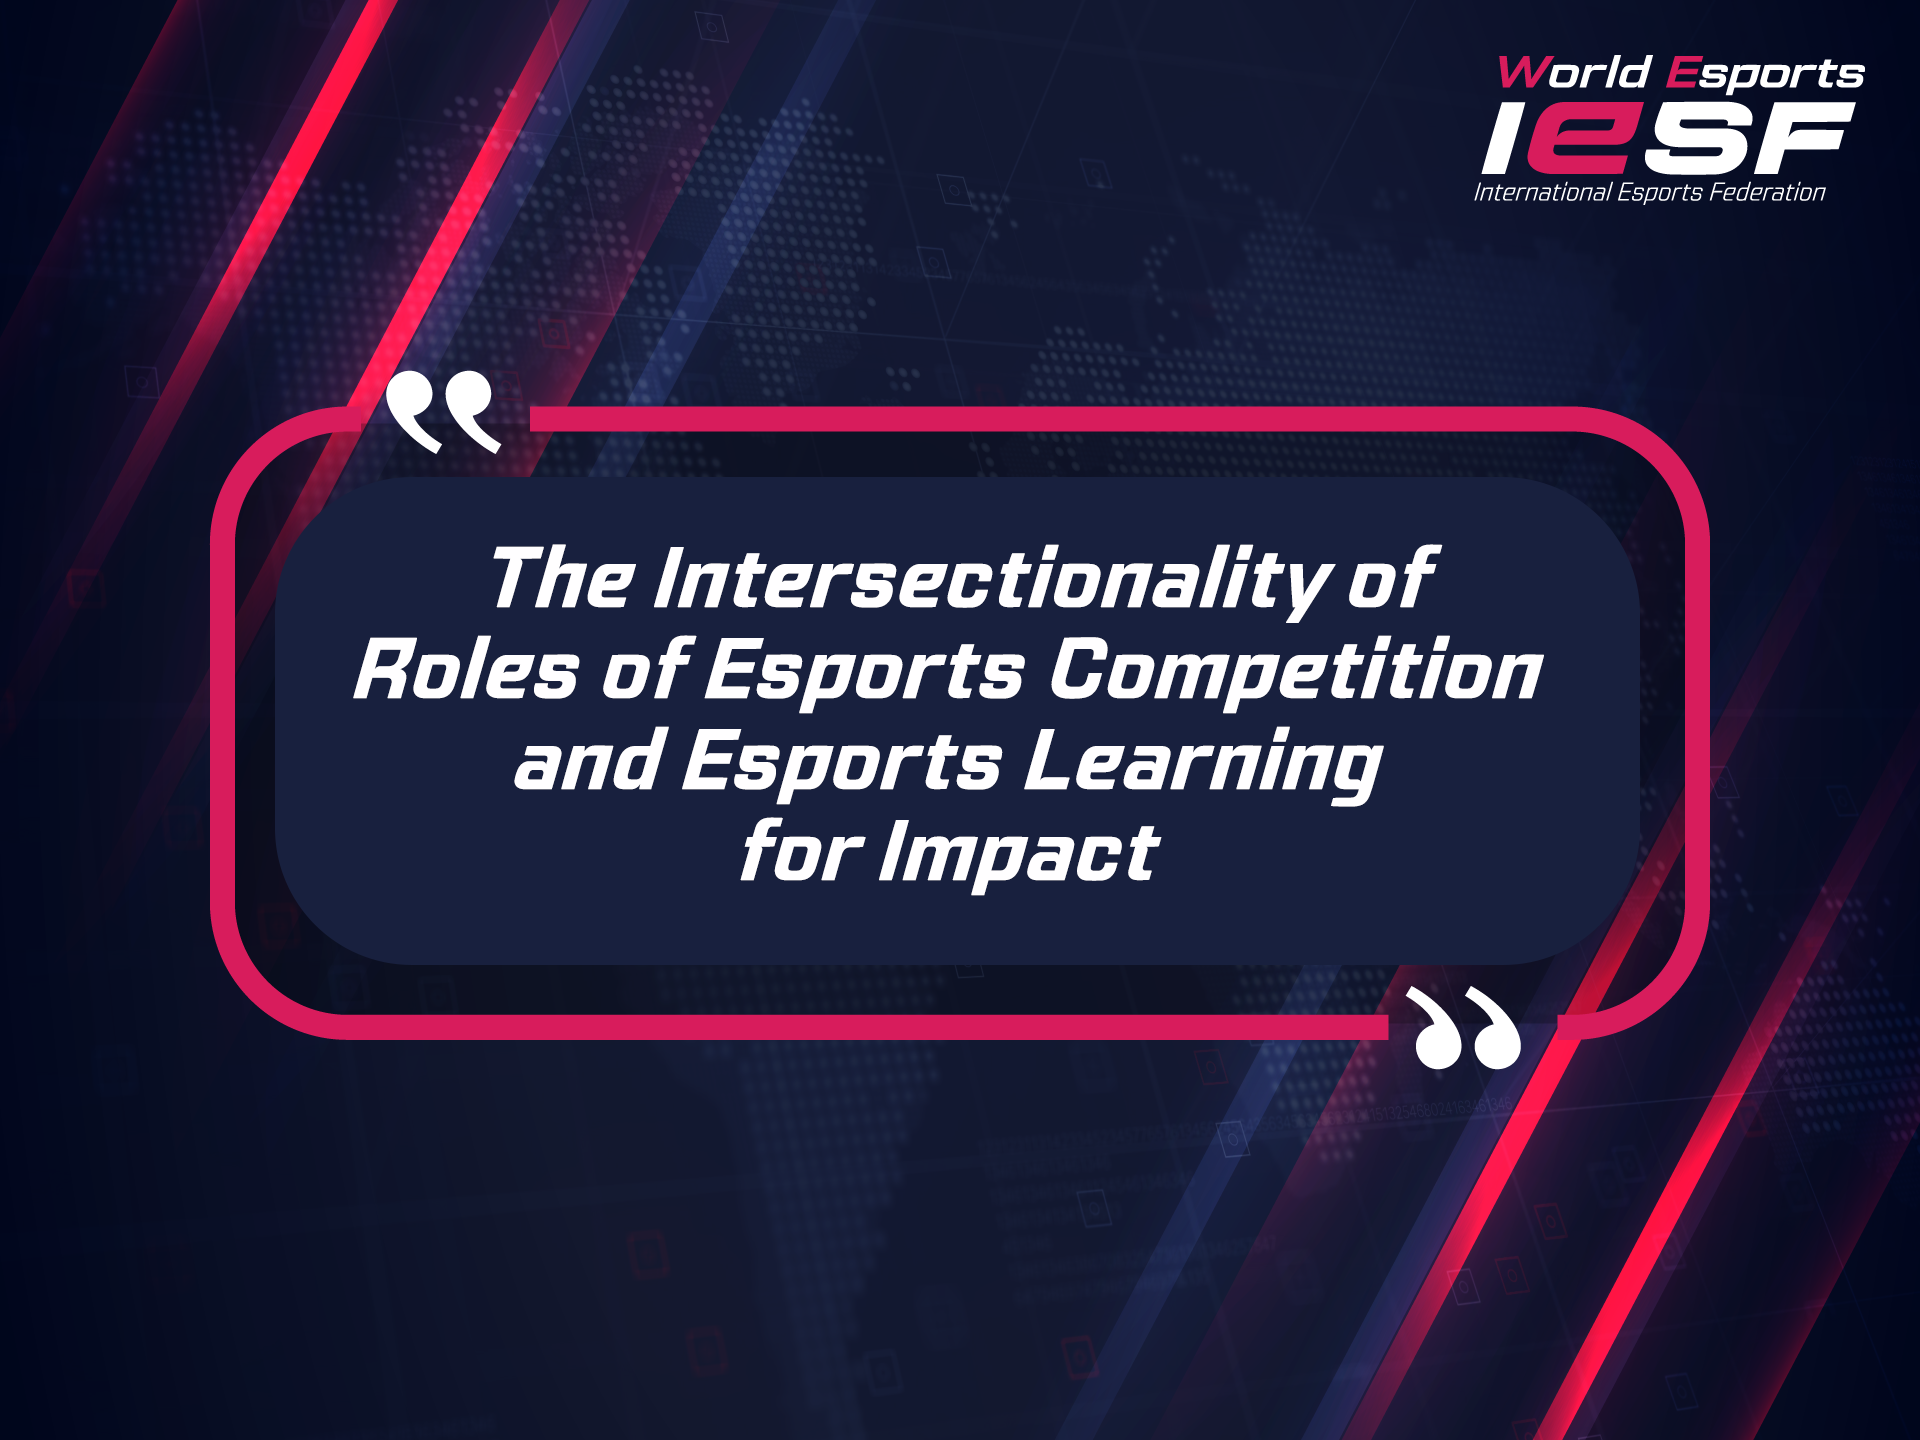 The Intersectionality of Roles of Esports Competition and Esports Learning for Impact